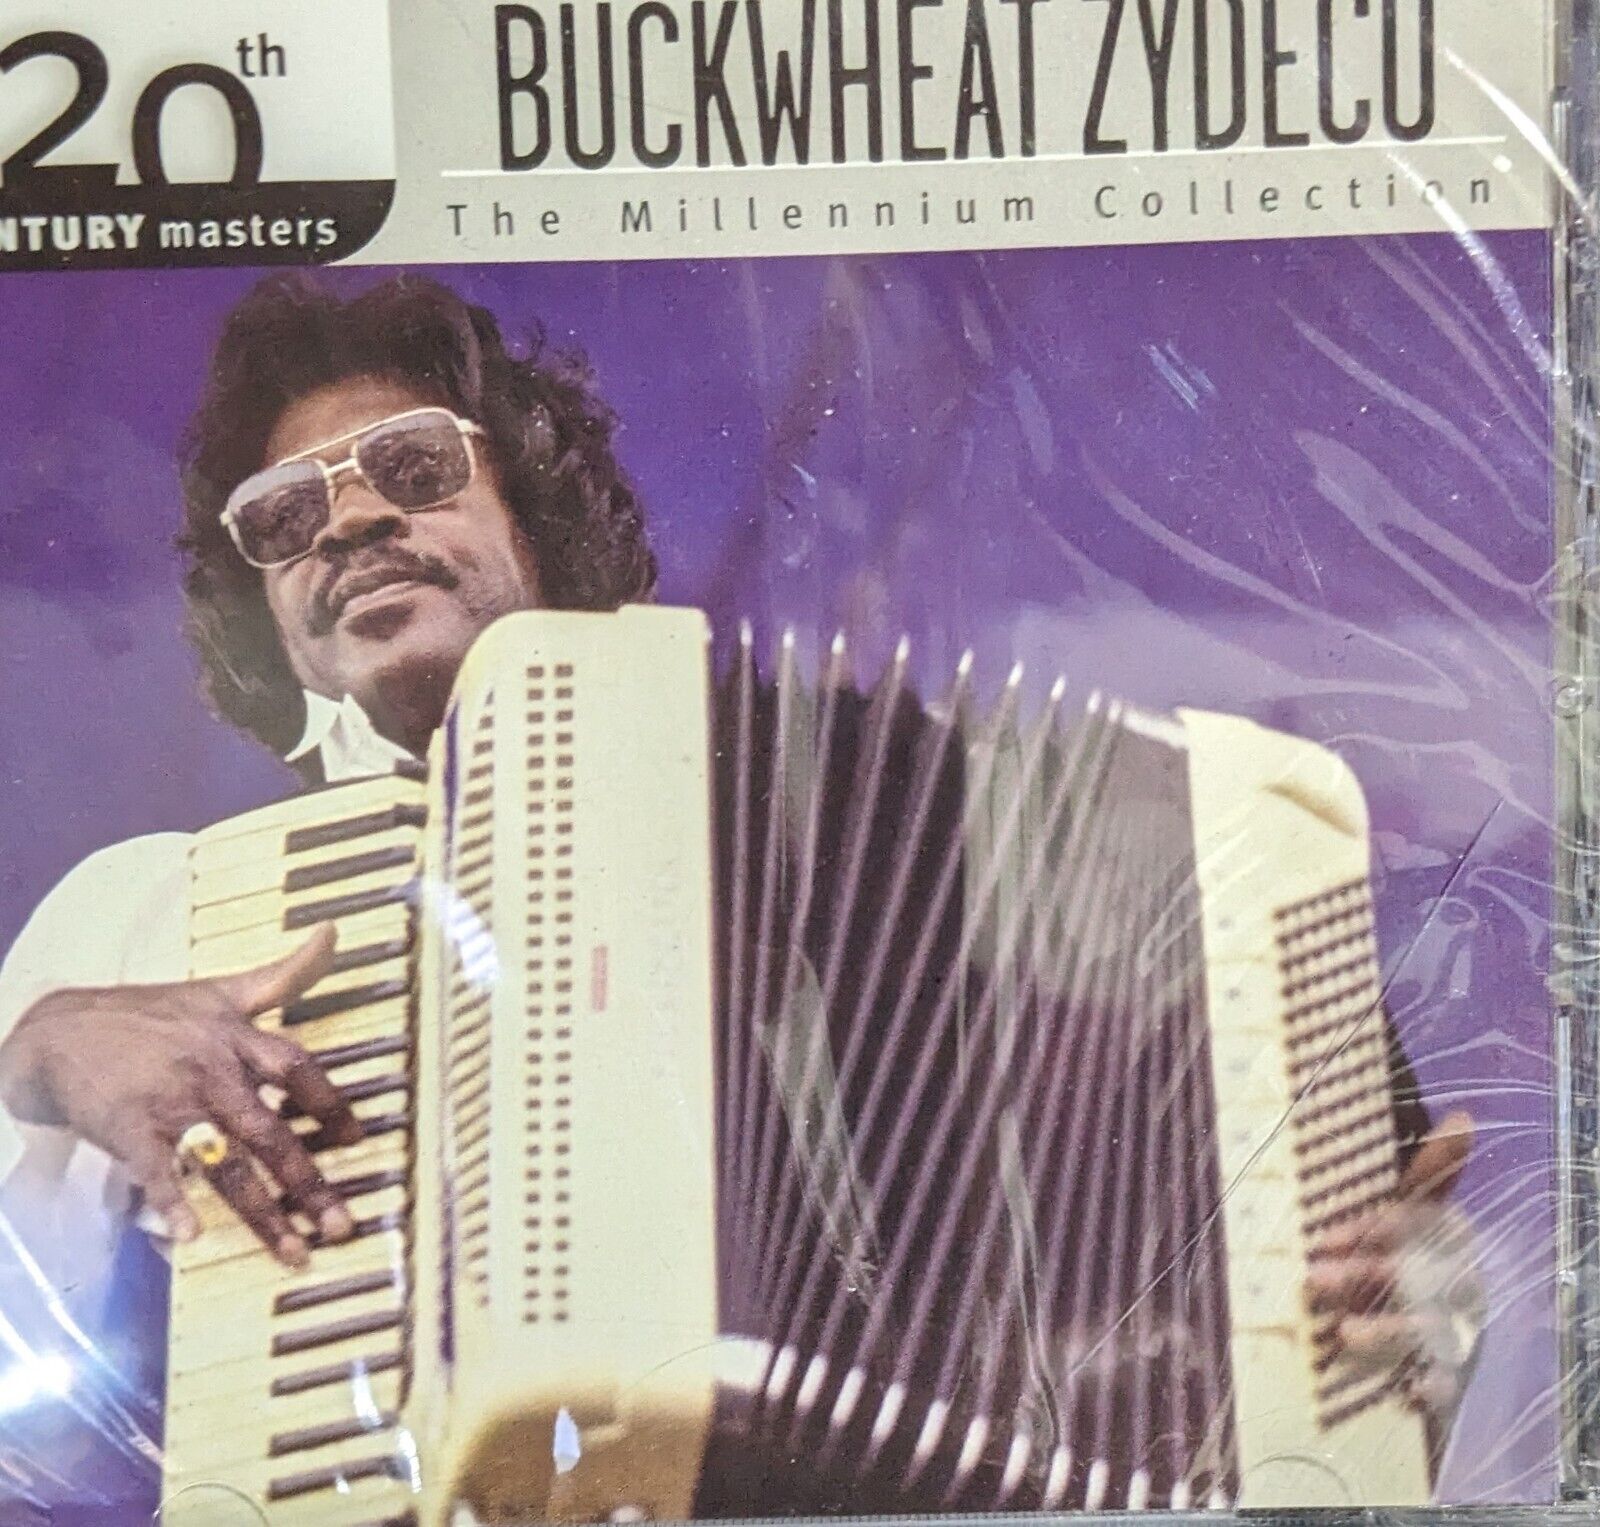 The Best of Buckwheat Zydeco - The Millennium Collection CD New [sealed]